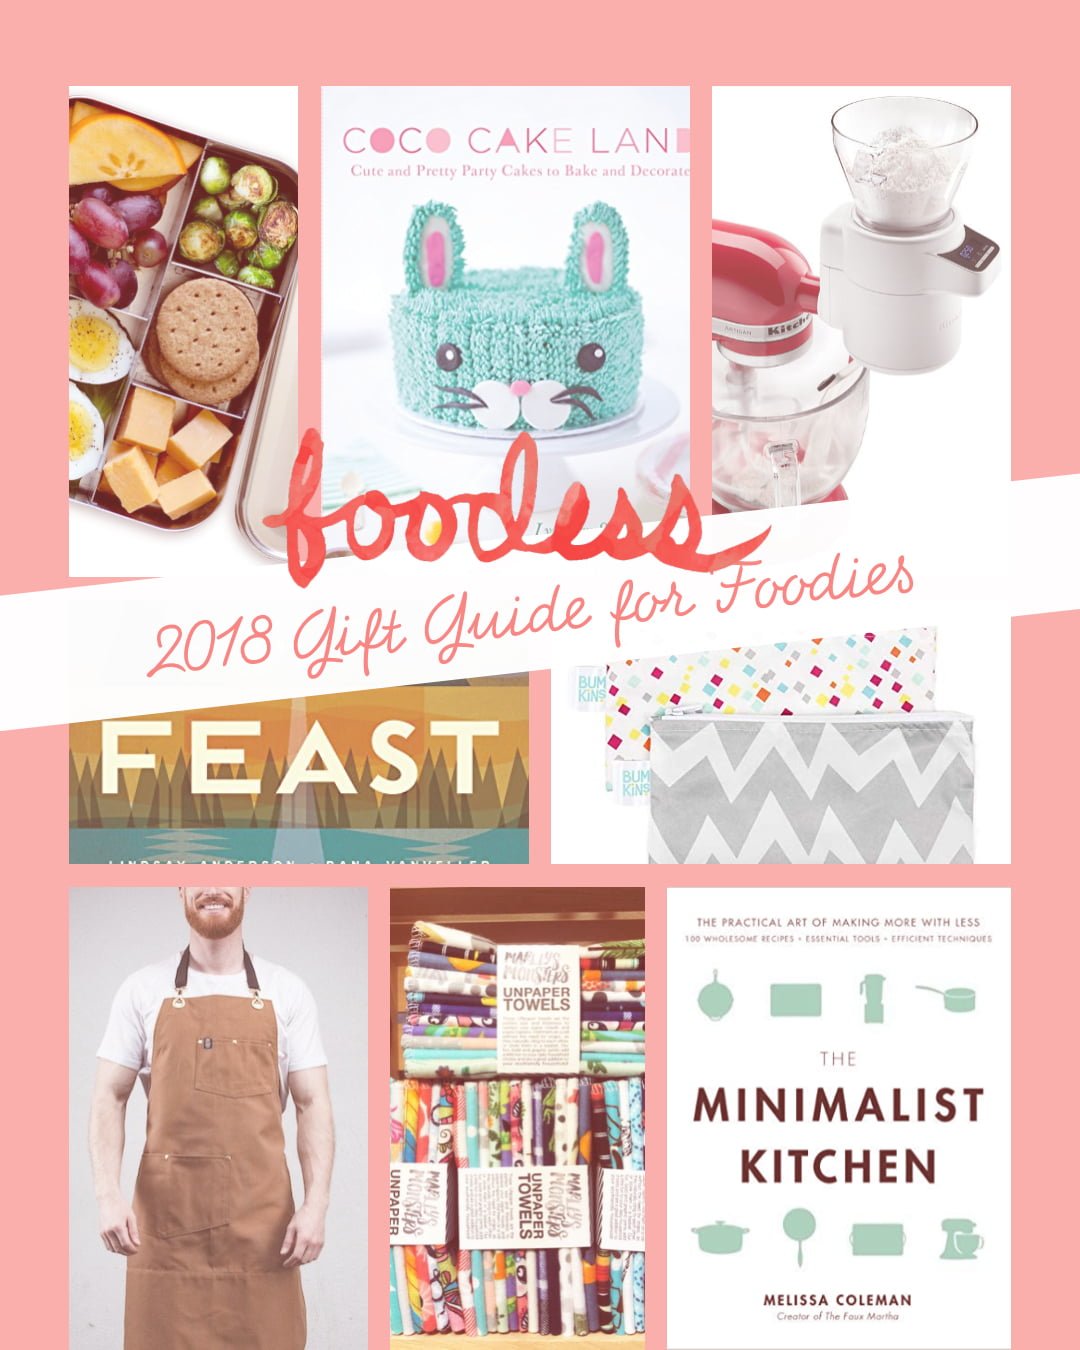 2018 Gift Ideas for Foodies